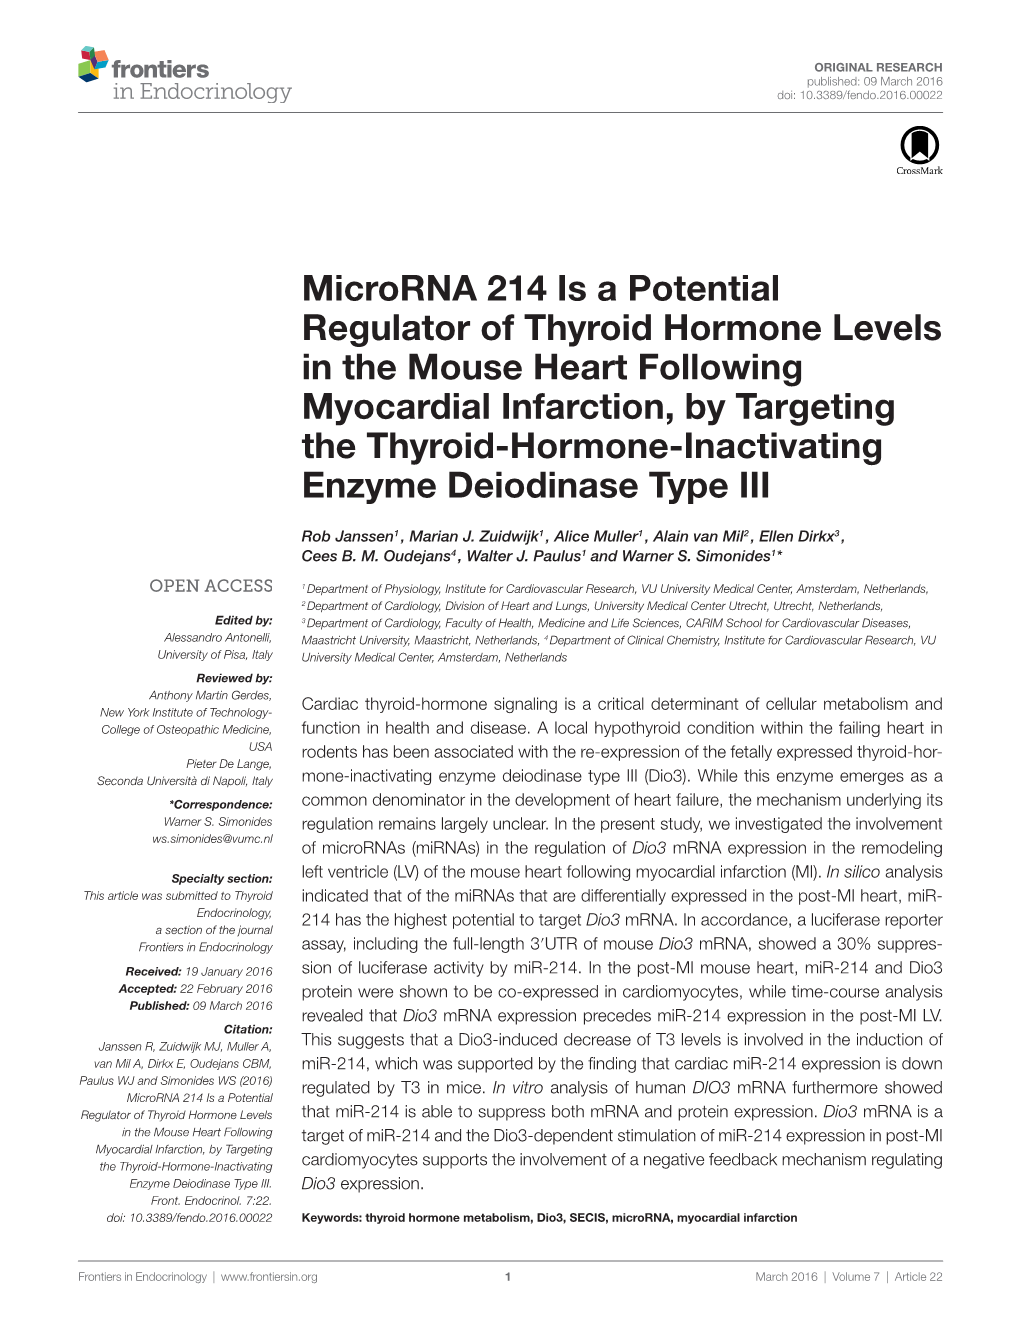 Microrna 214 Is a Potential Regulator of Thyroid Hormone